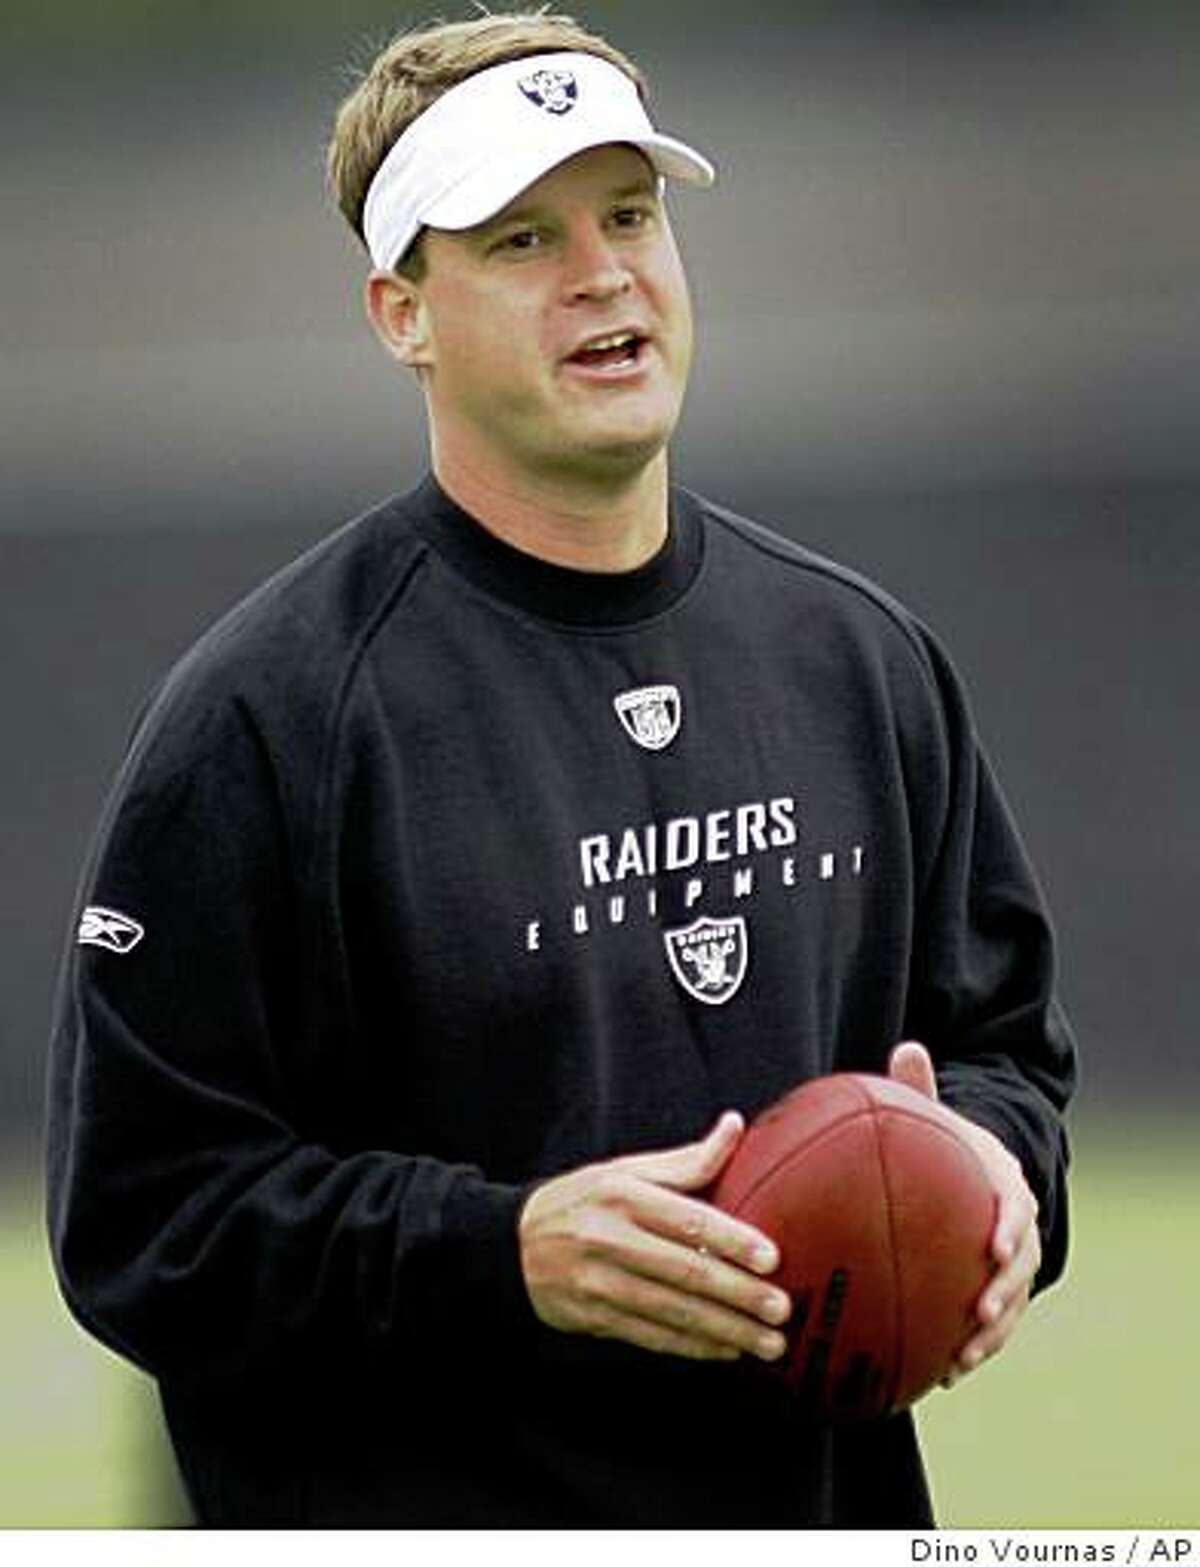 ** FILE ** In this July 28, 2007, file photo, then-Oakland Raiders coach Lane Kiffin talks to his players during the Raiders' NFL football training camp in Napa, Calif. Tennessee and Kiffin have reached a tentative agreement with the formerRaiders coach to lead the Volunteers, a person familiar with the negotiations told The Associated Press on Friday, Nov. 28, 2008. A formal announcement was expected early next week, said the person, who requested anonymity because the deal had not been finalized. (AP Photo/Dino Vournas, File)